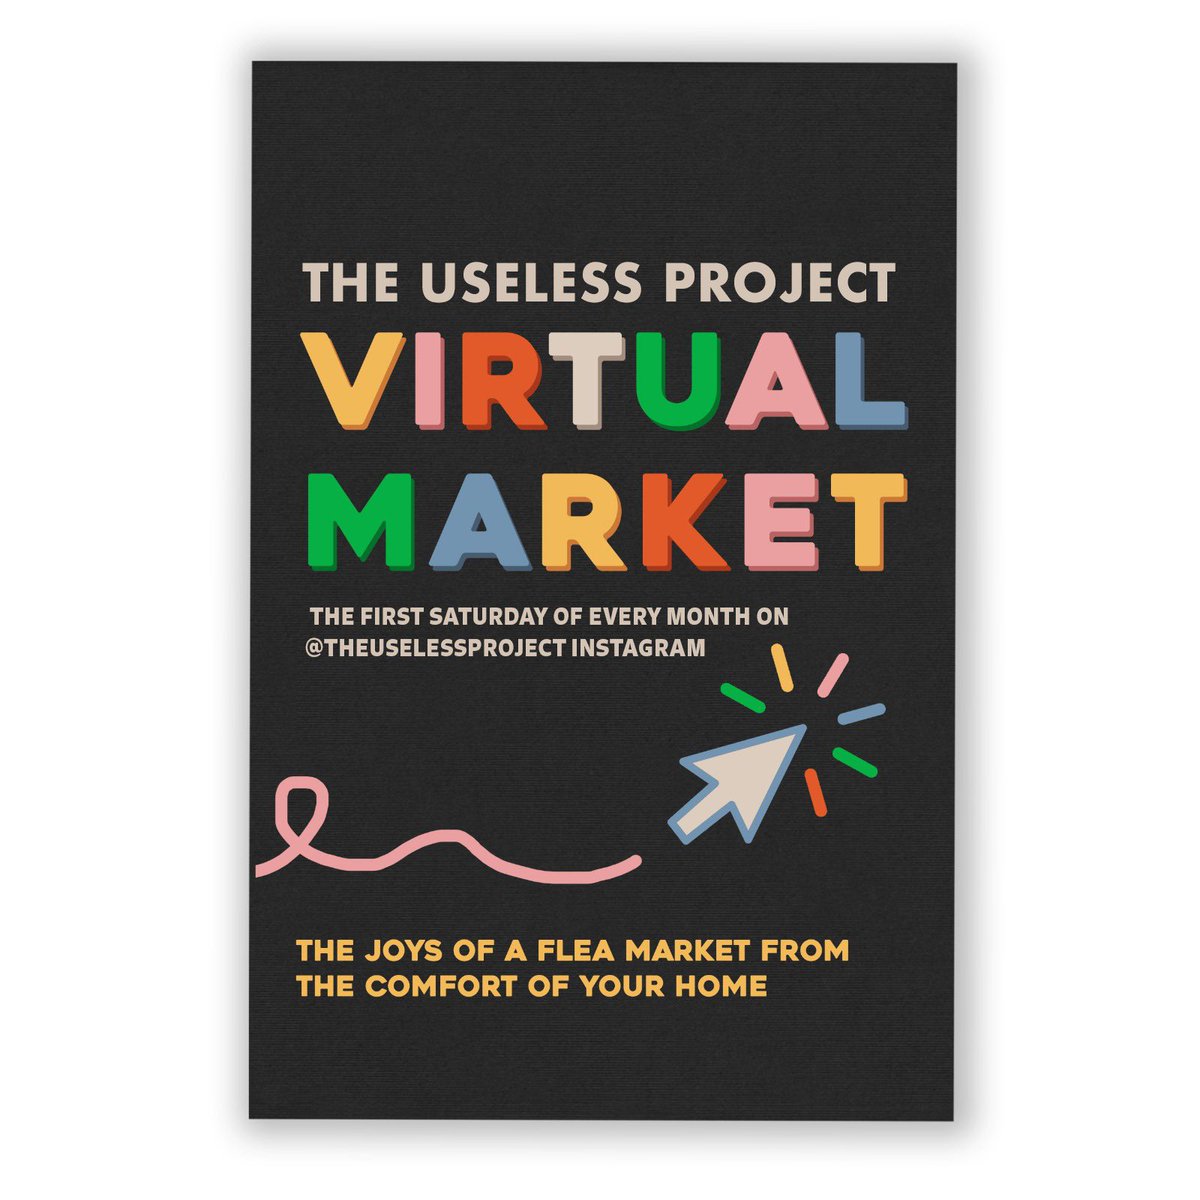 We’re taking part in The Useless Project’s Virtual market today over on their Instagram! Lots of fantastic sustainable small businesses to support #shopsmallbusiness #irishdesign #irishinteriors #womeninbusiness